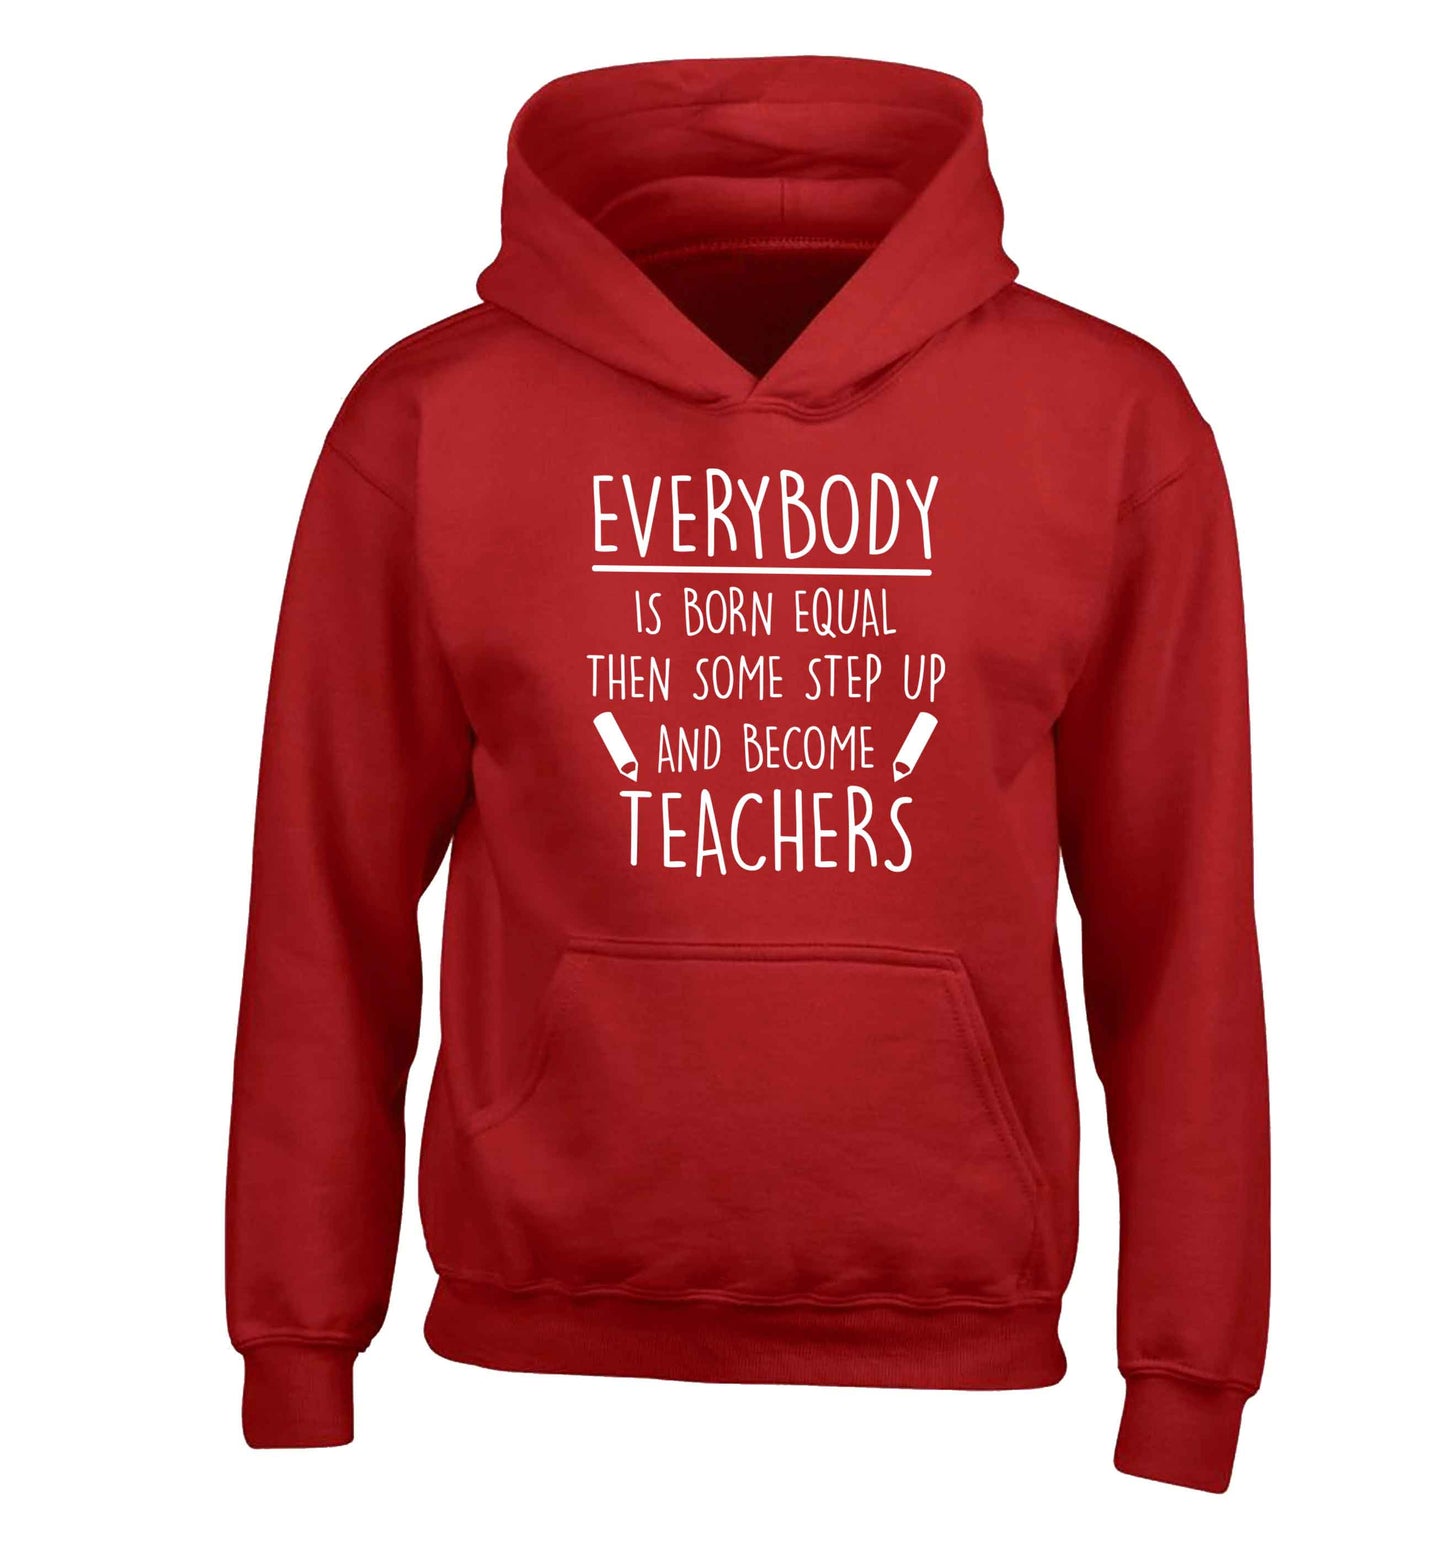 Everybody is born equal then some step up and become teachers children's red hoodie 12-13 Years